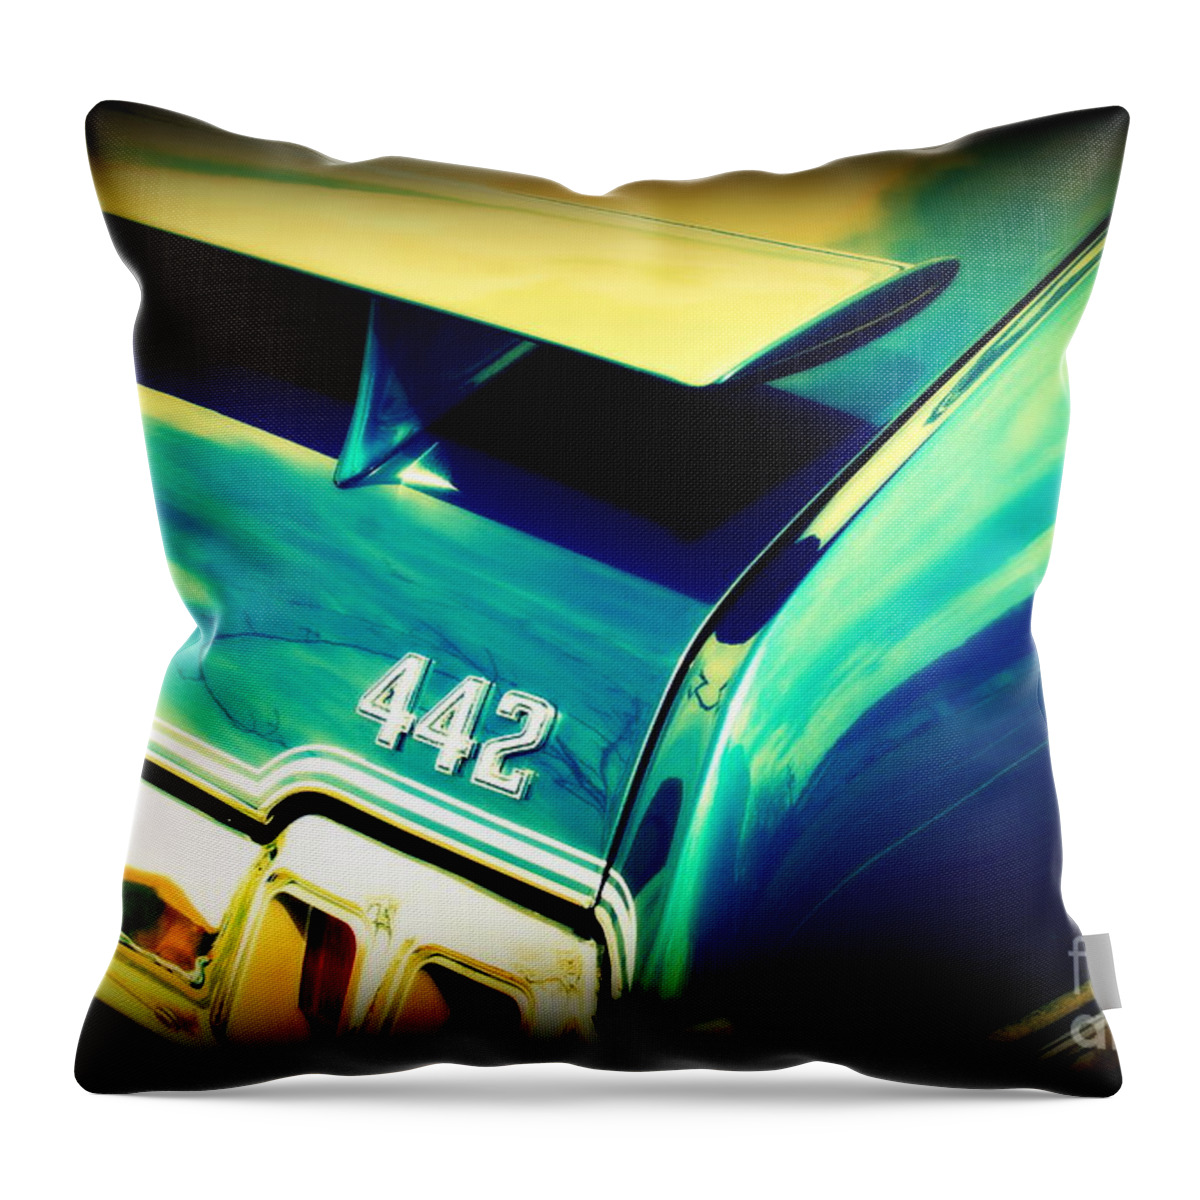 Oldsmobile 442 Throw Pillow featuring the photograph Oldsmobile 442 by Susanne Van Hulst